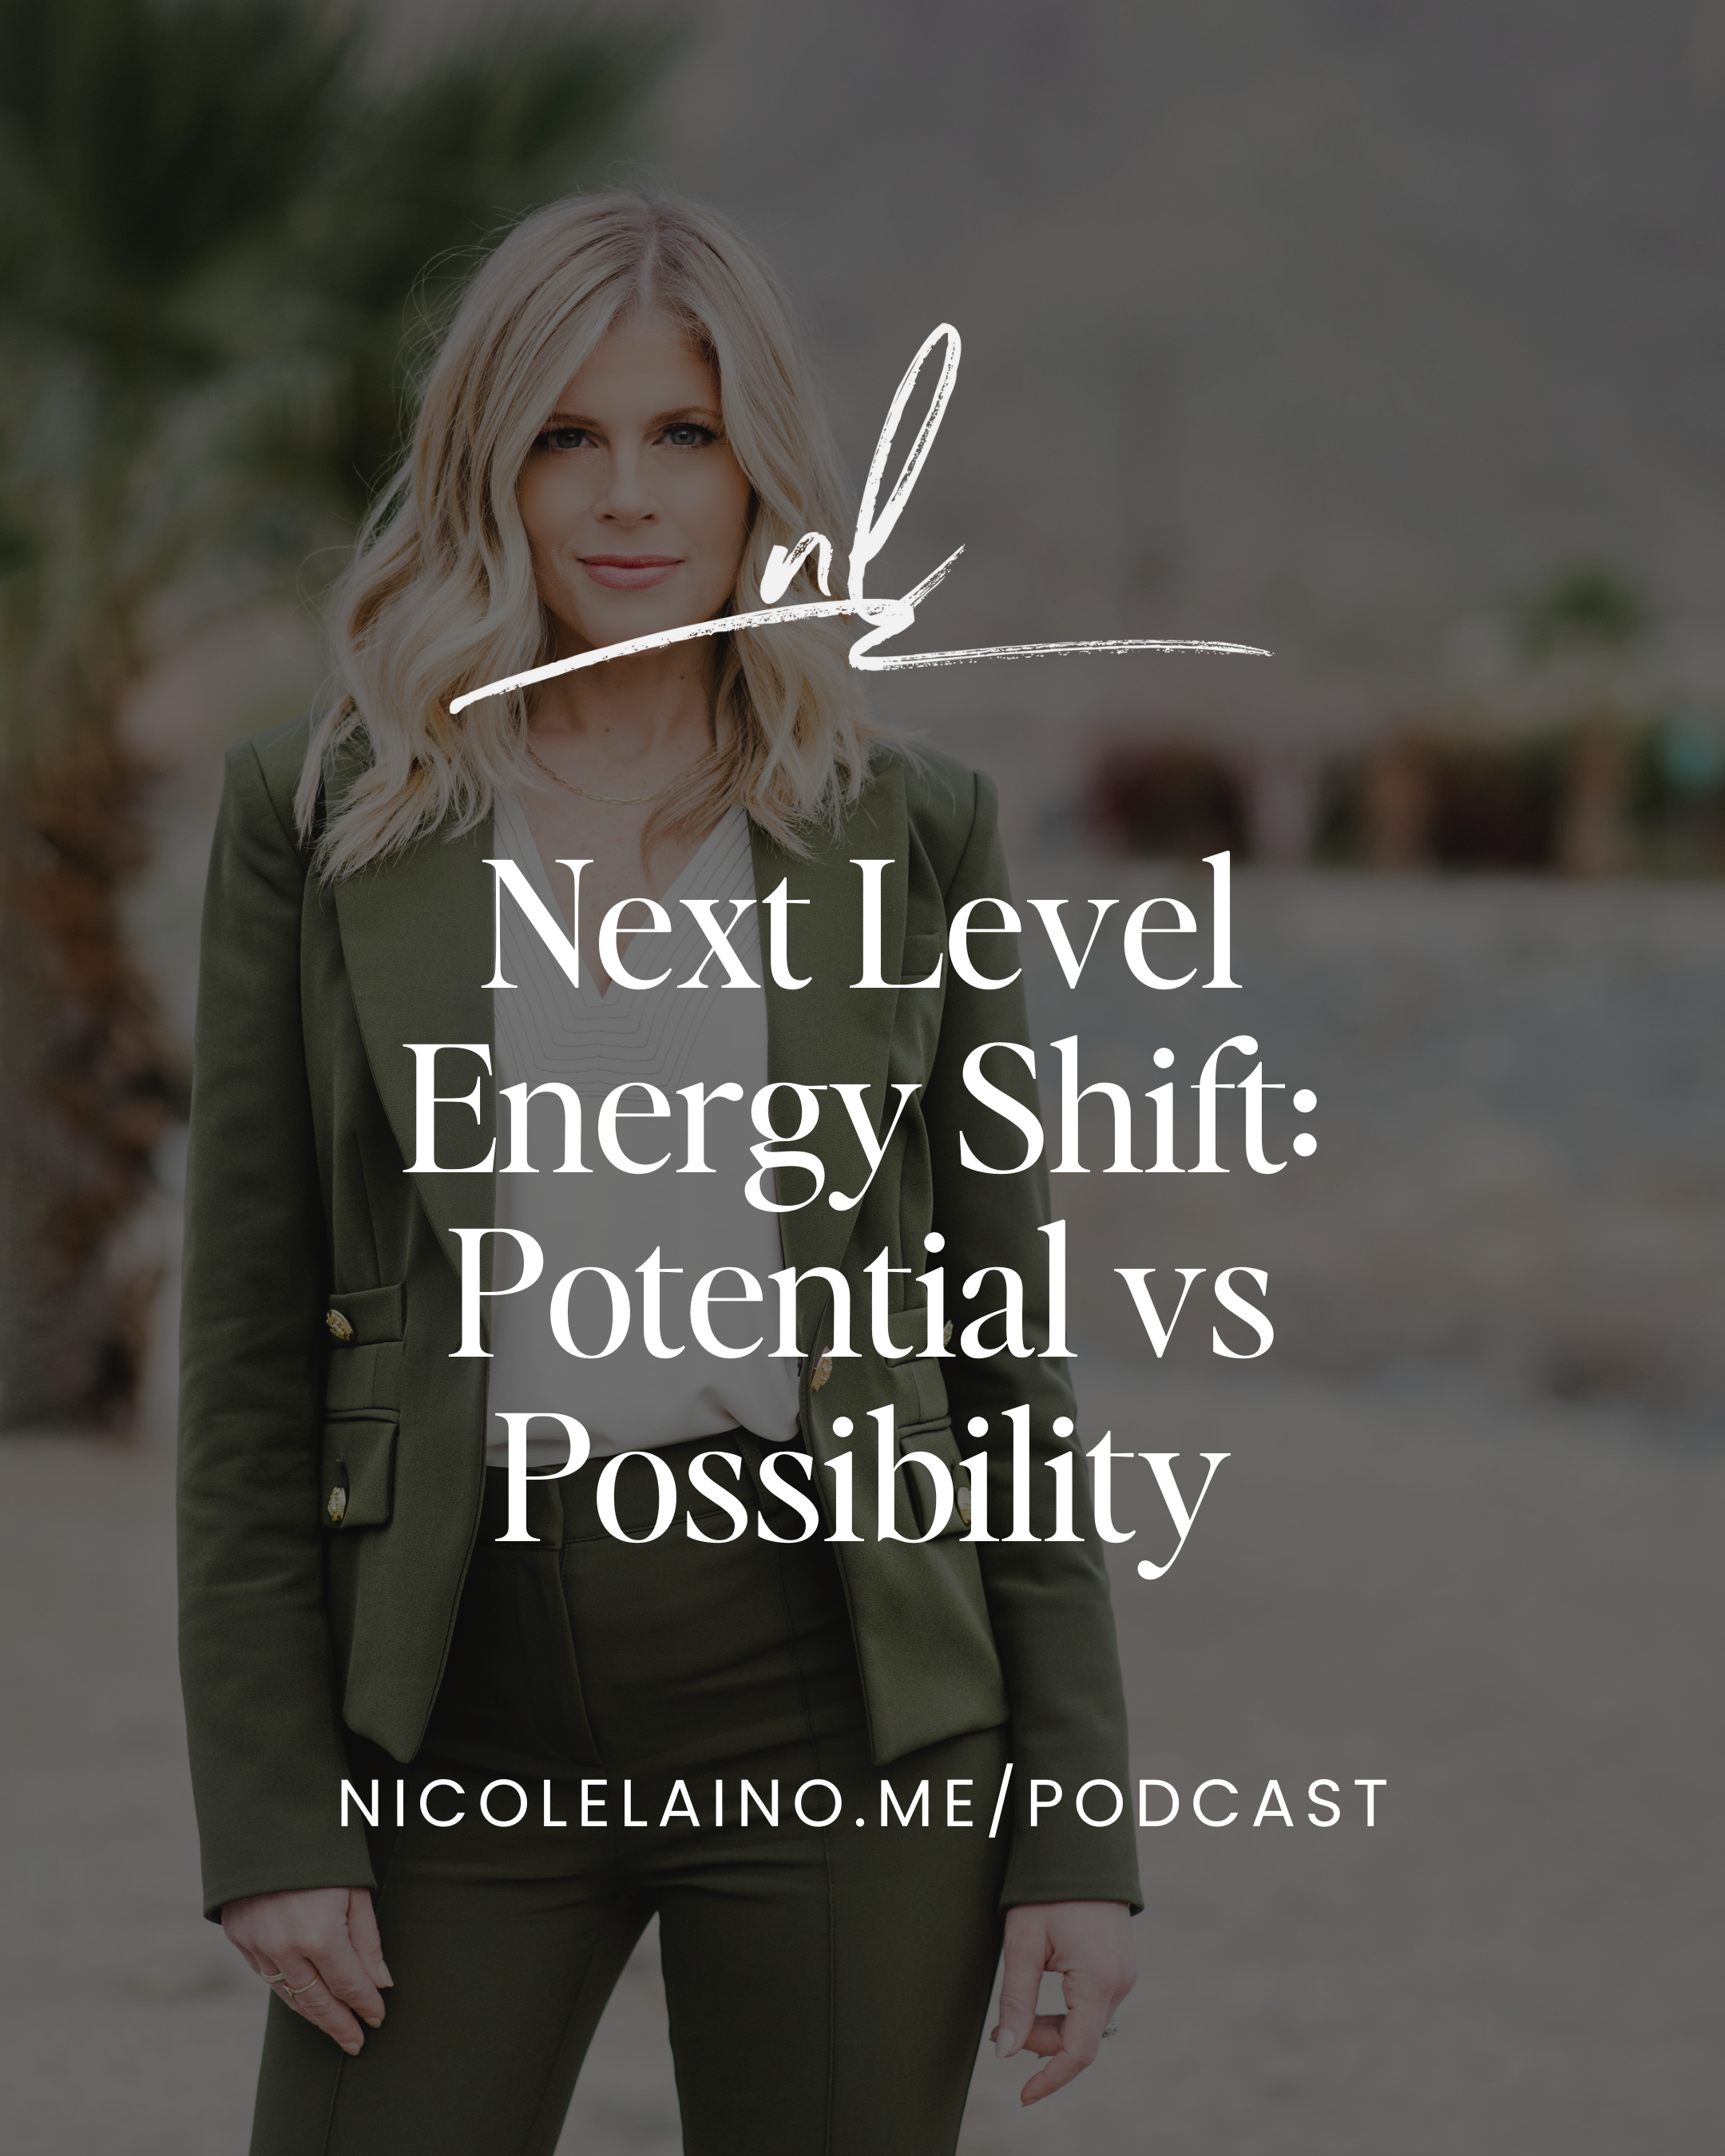 Next Level Energy Shift: Potential vs Possibility